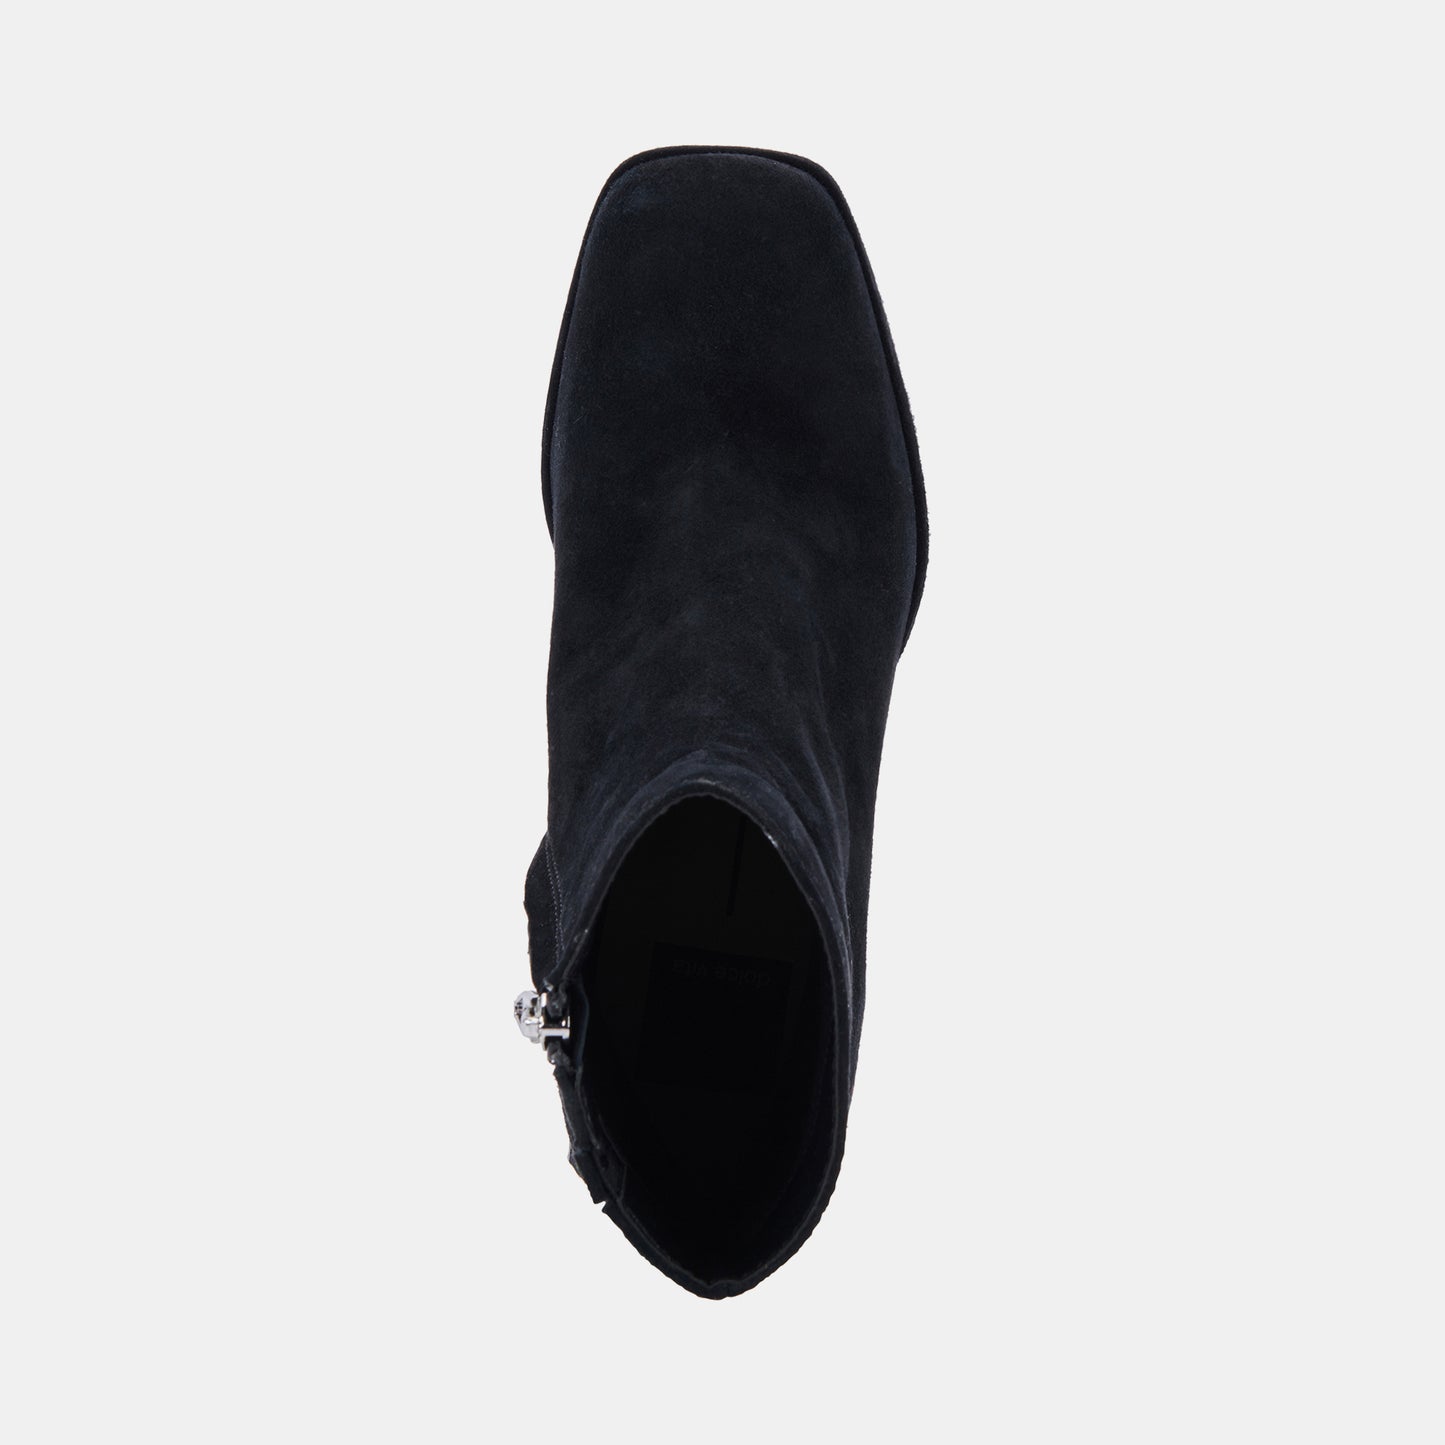 ULYSES BOOTS BLACK SUEDE